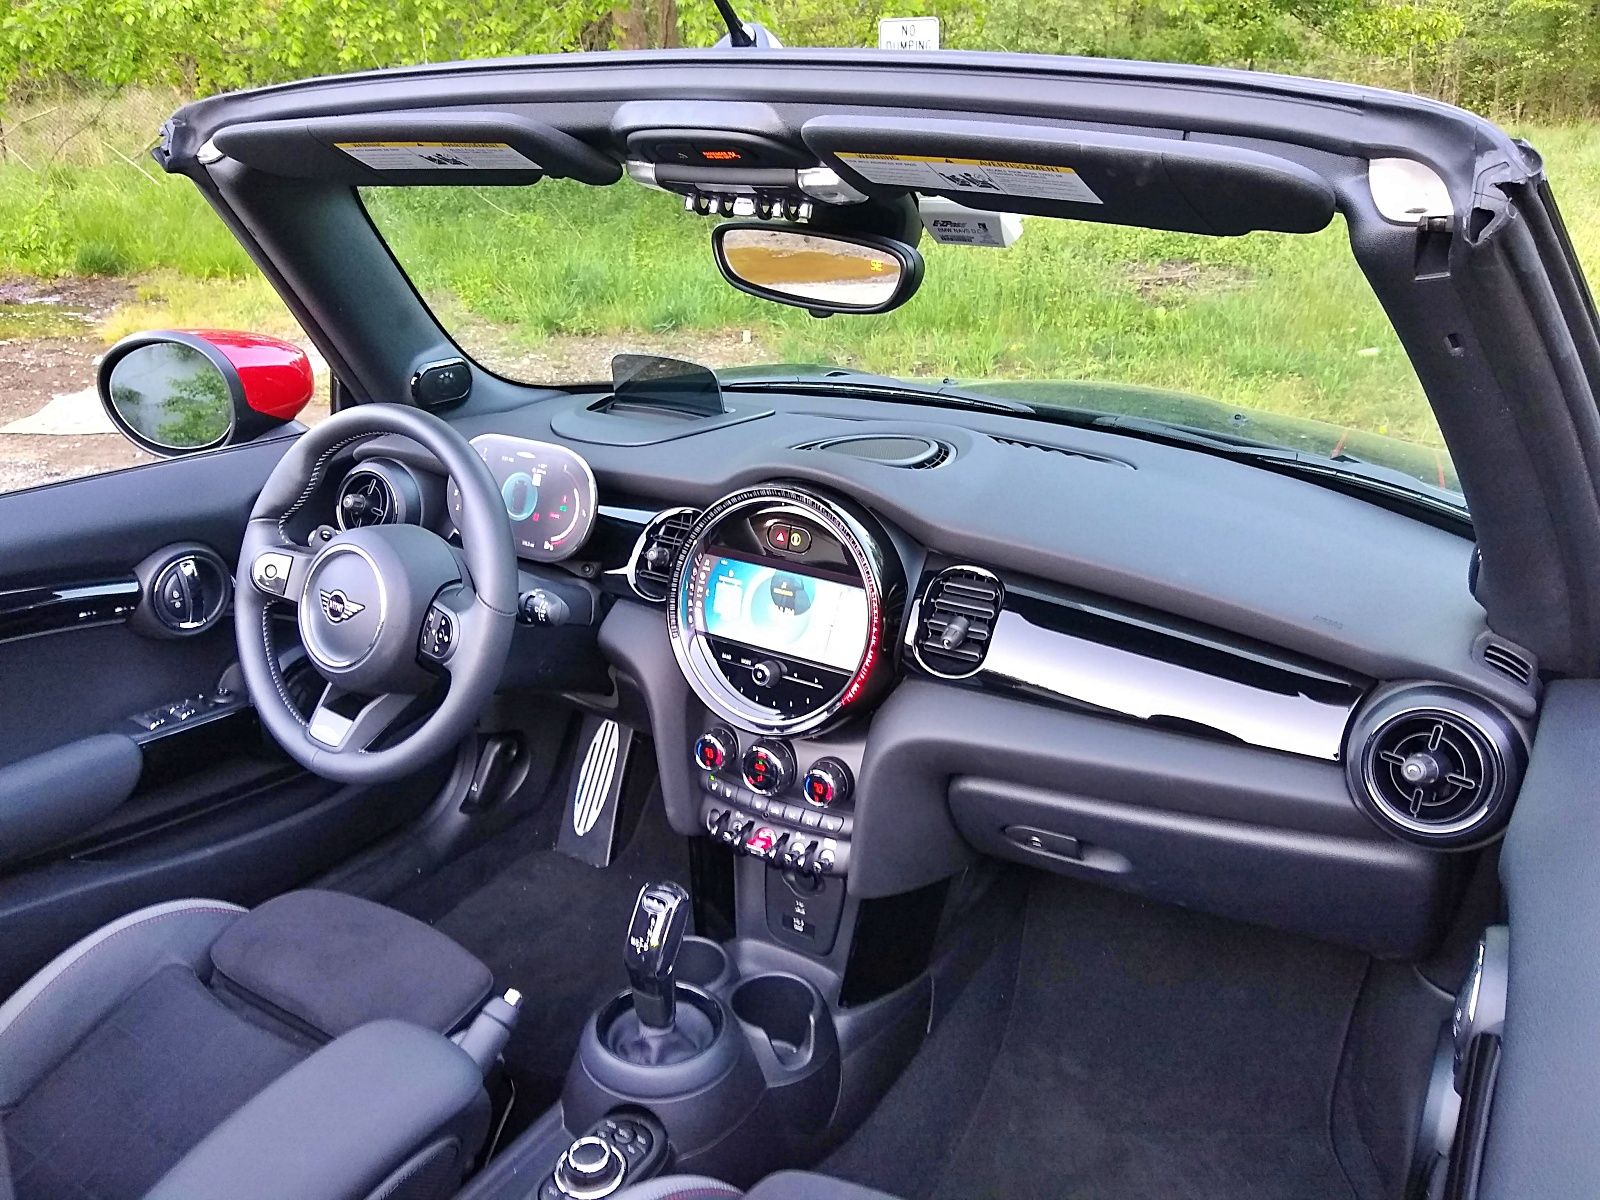 2022 2022 Mini Cooper Convertible Review: Is ‘Miata’ Really Always the Answer? 